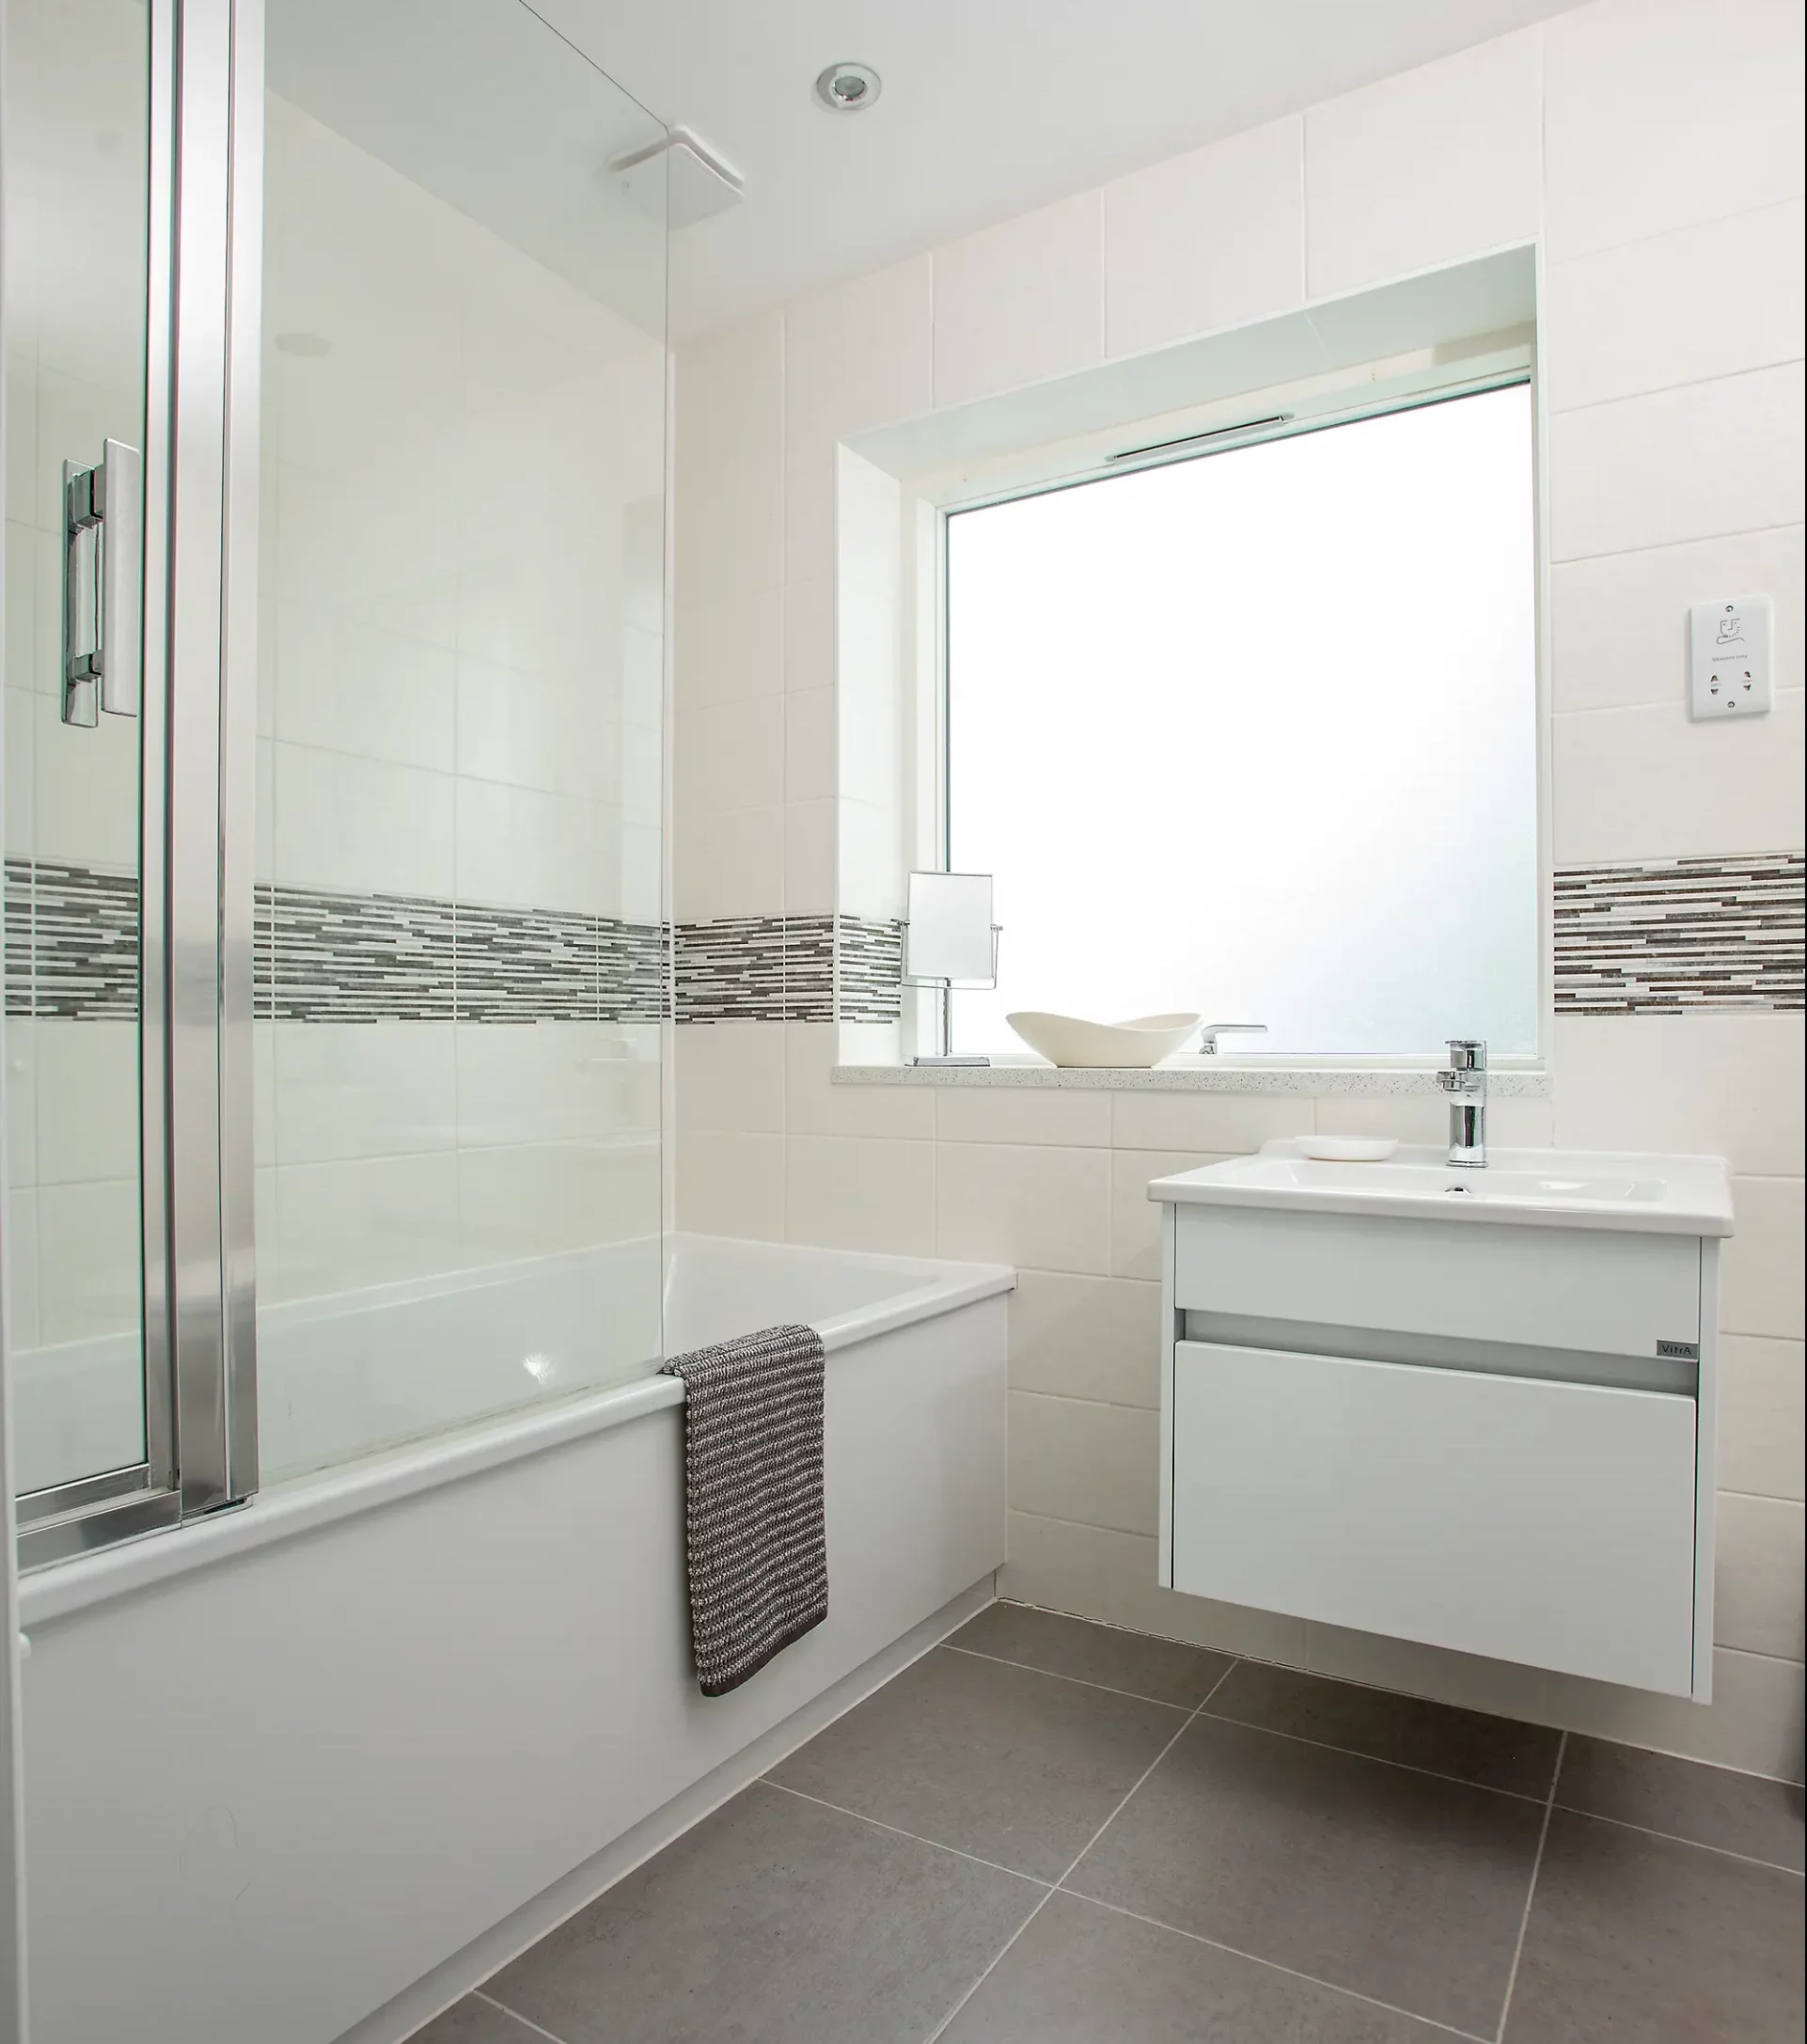 White and grey bathroom in remodelled house